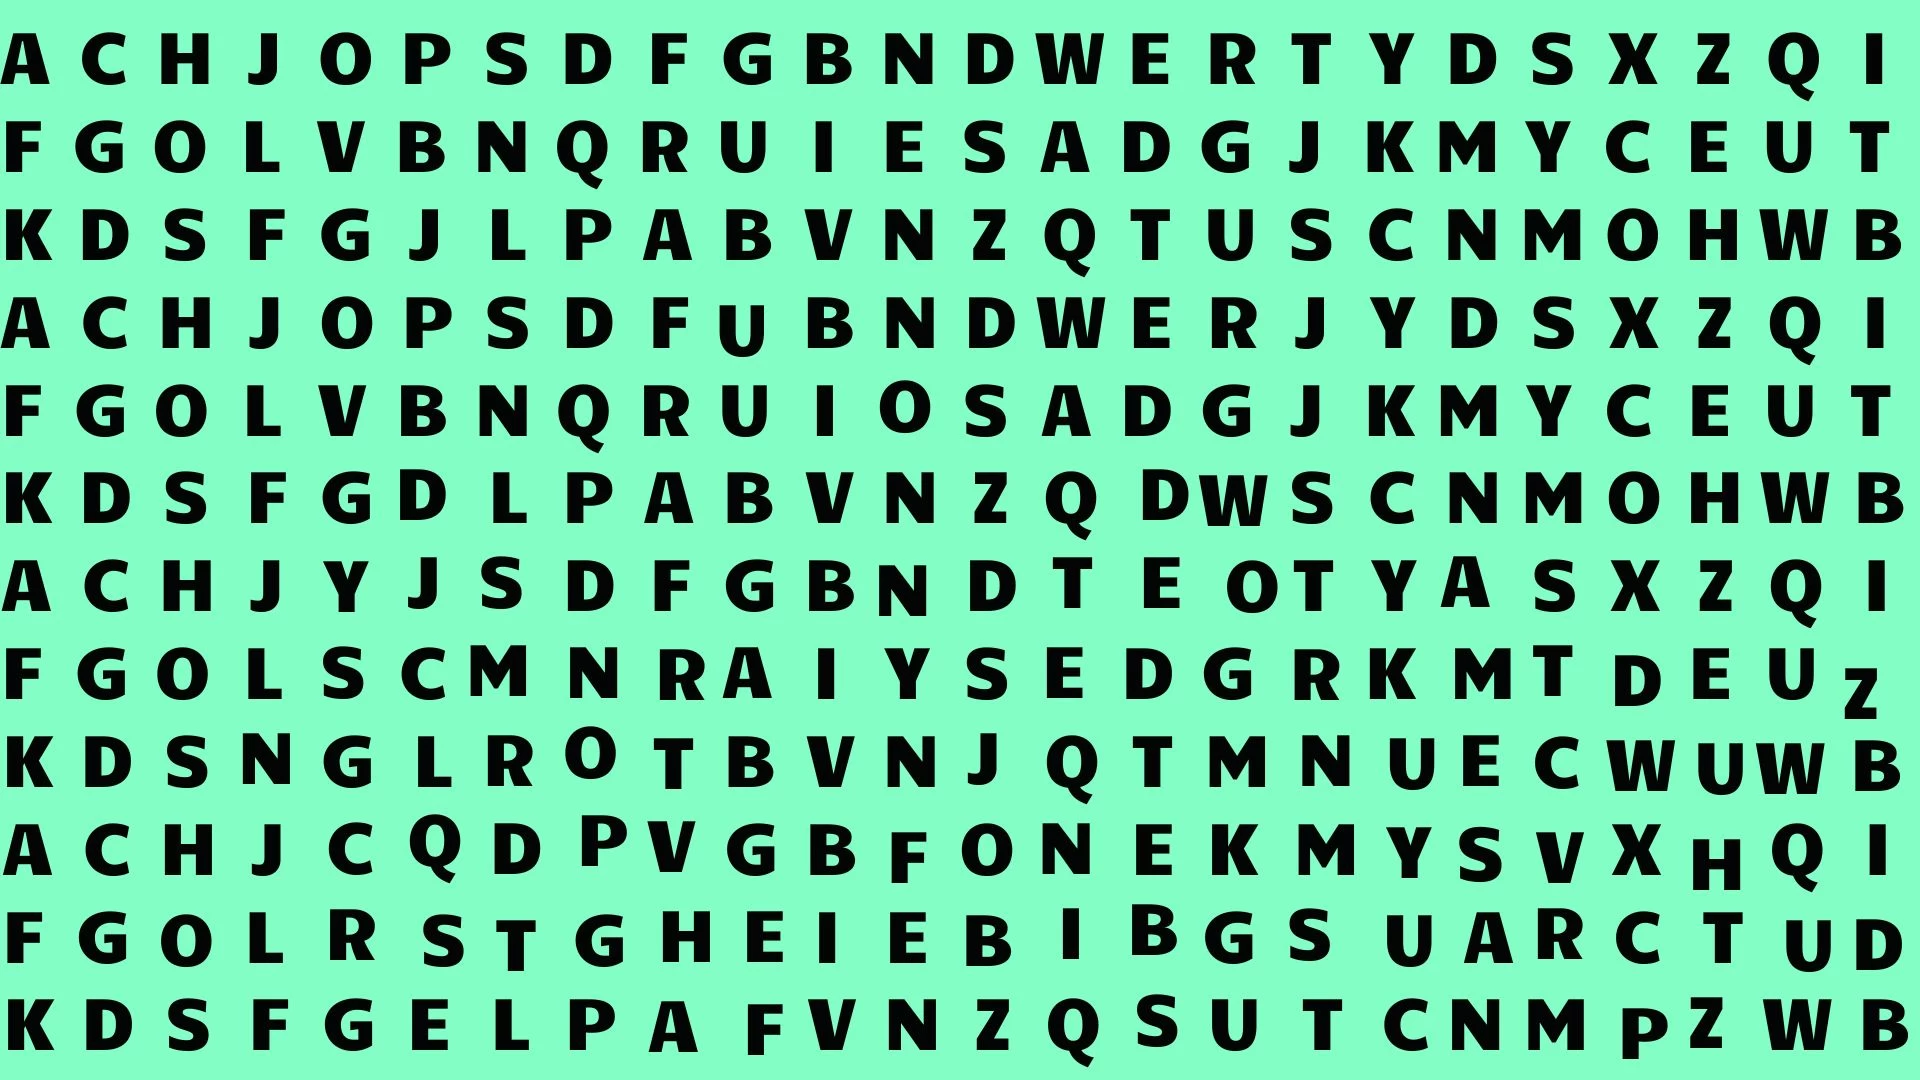 Only 5% of People Can Spot the Word Move in This Image Within 10 Seconds